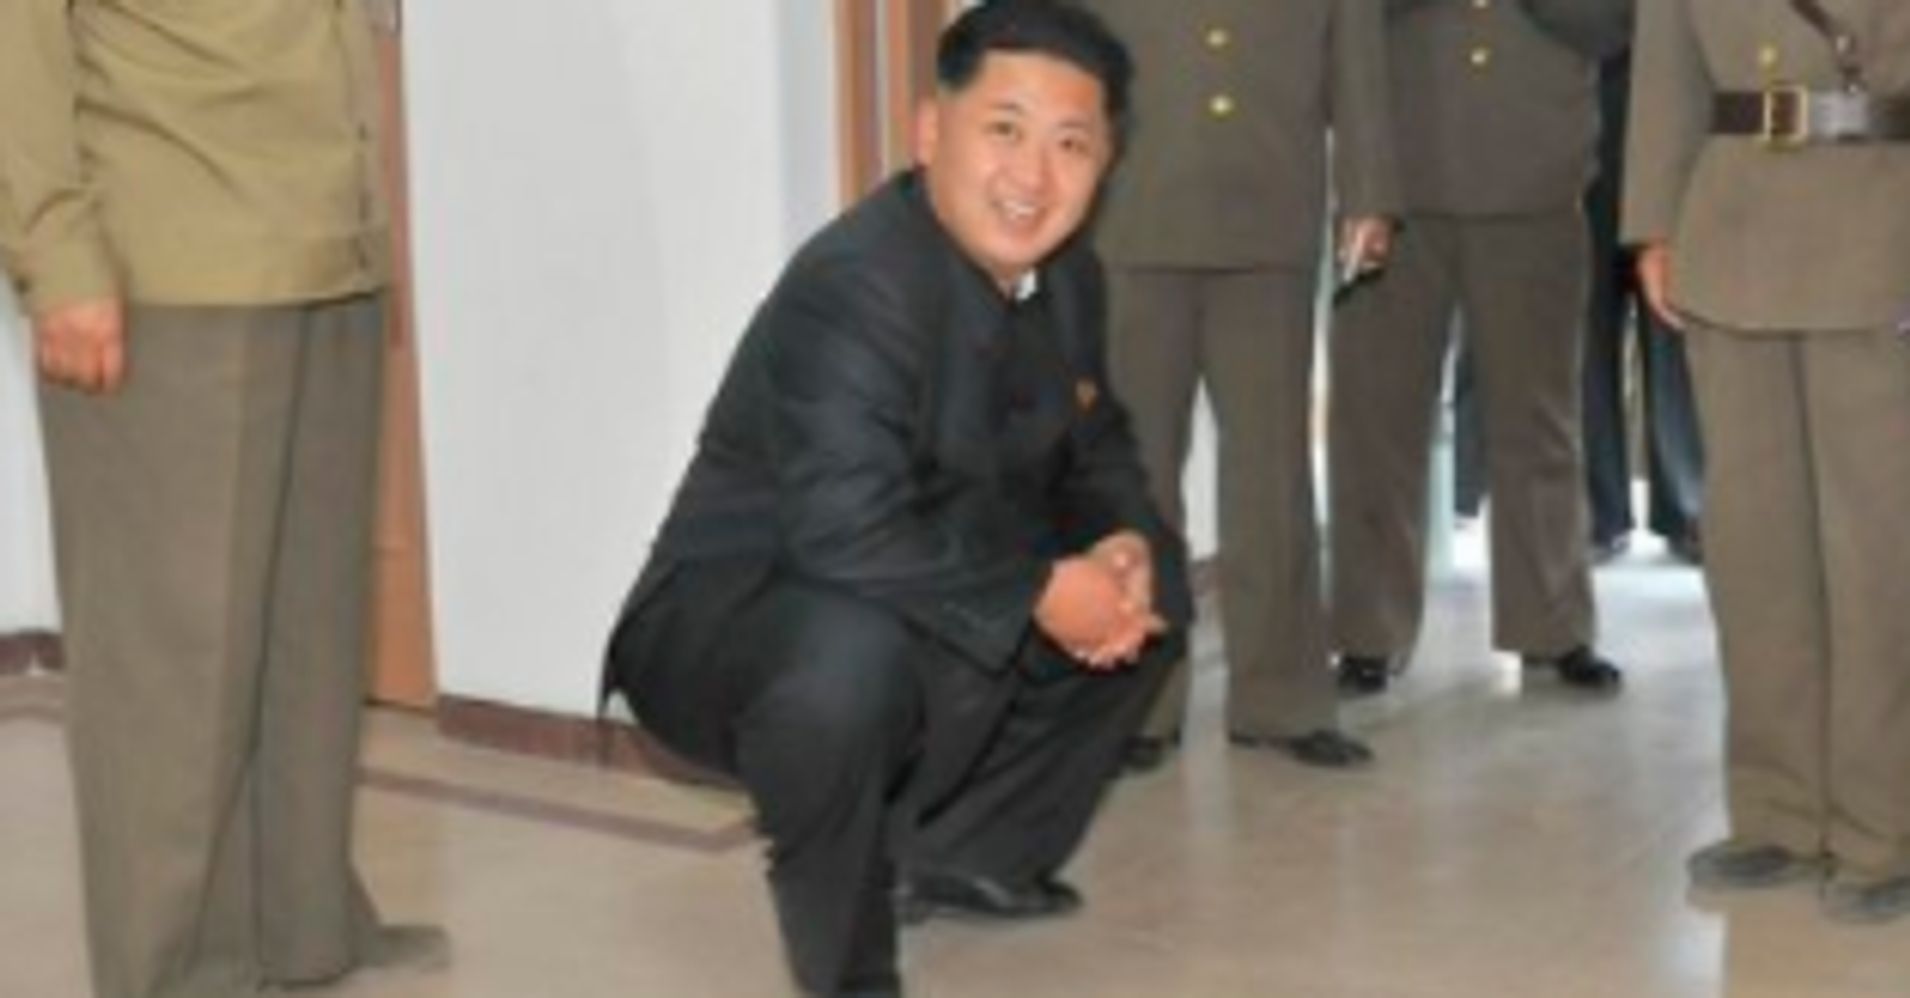 Redditors Rework Old Photo Of A Squatting Kim Jong Un To Hilarious Effect | HuffPost1904 x 1000